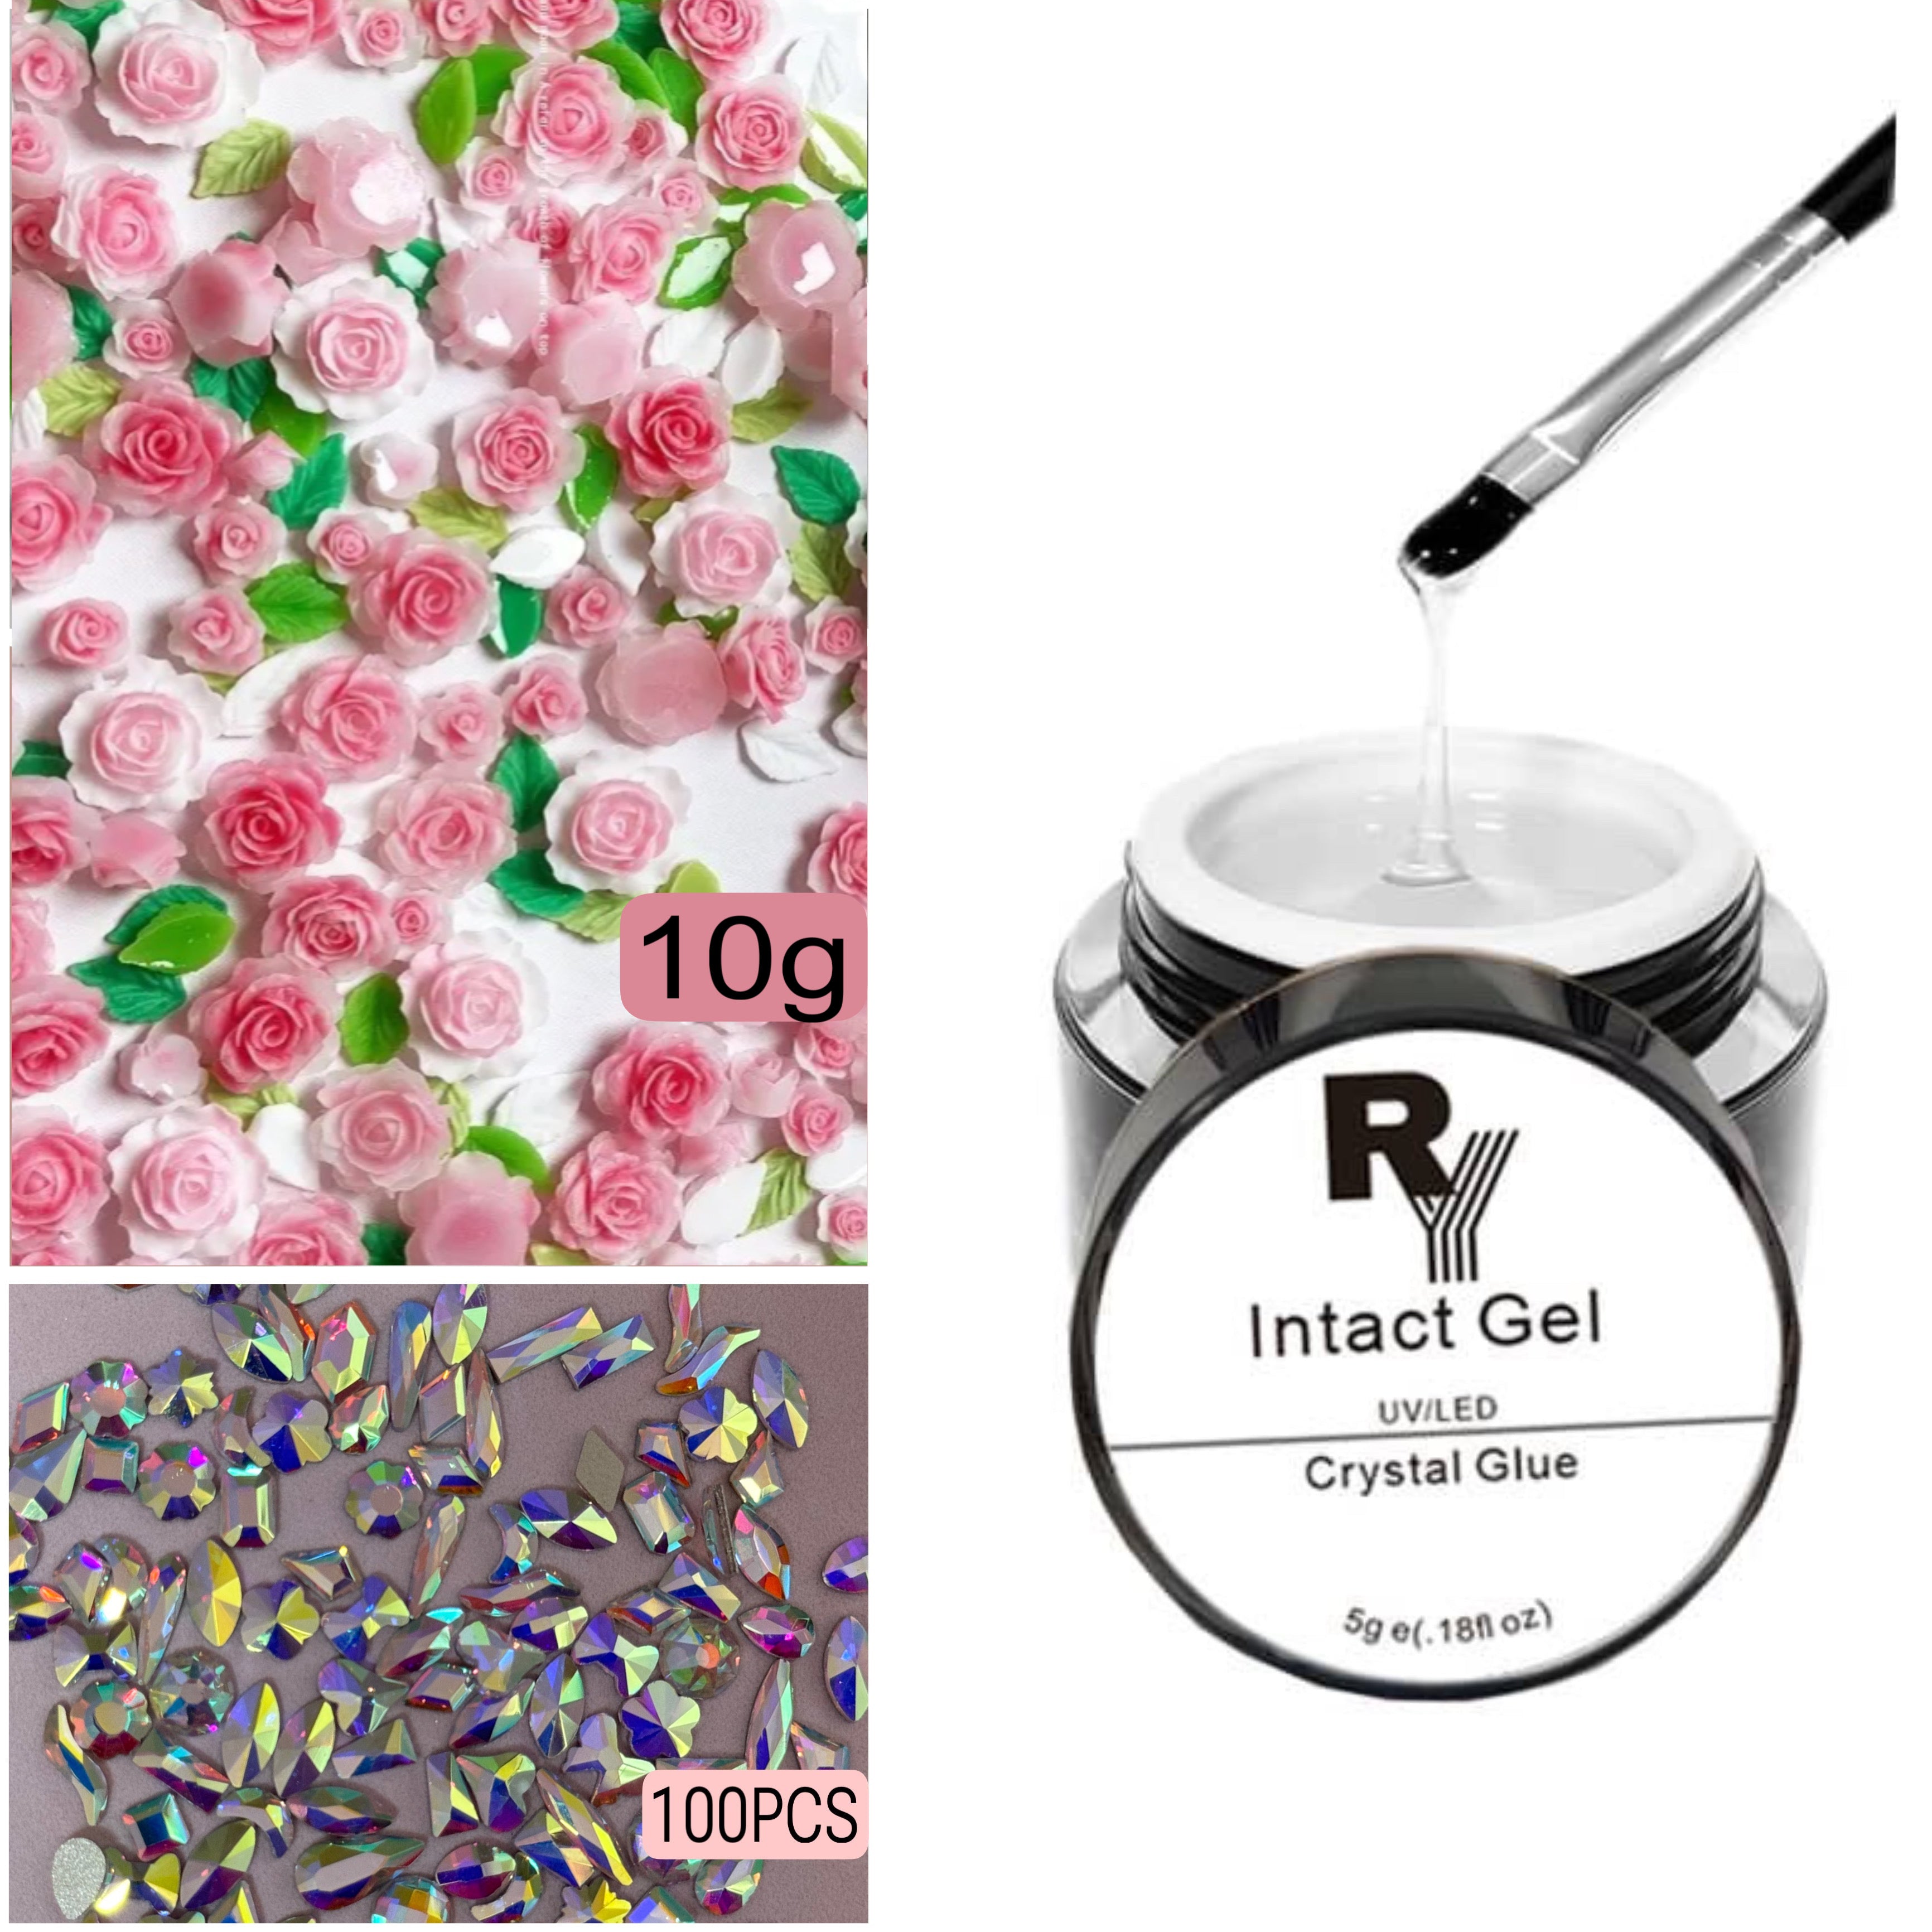 Roses and Crystals Bundle